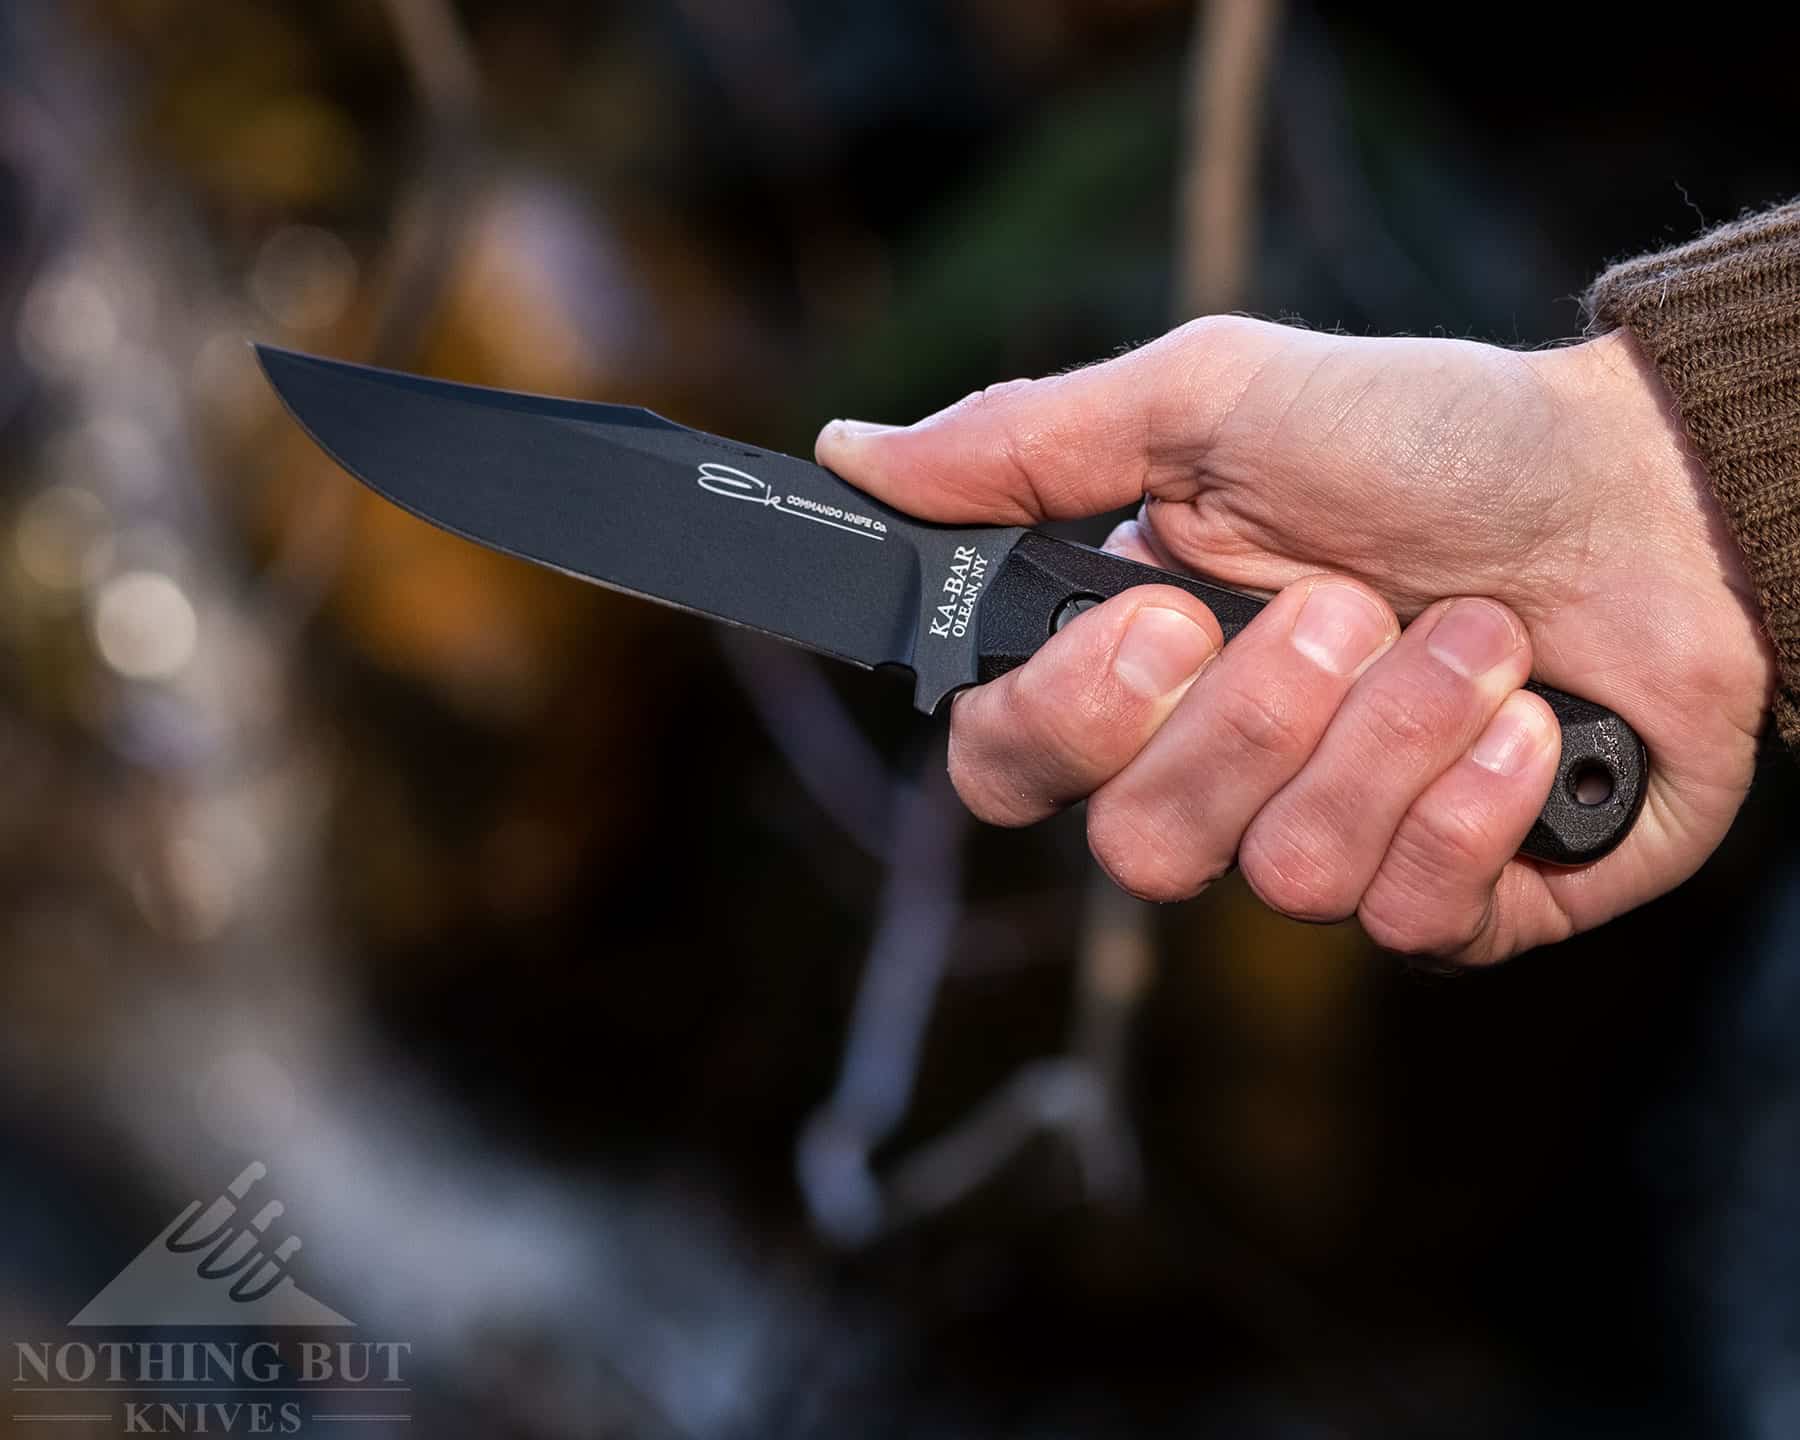 The job of keeping your hand in place falls to the cuts on the handle scales of the Ka-Bar Ek Commando Short Clip Point knife.